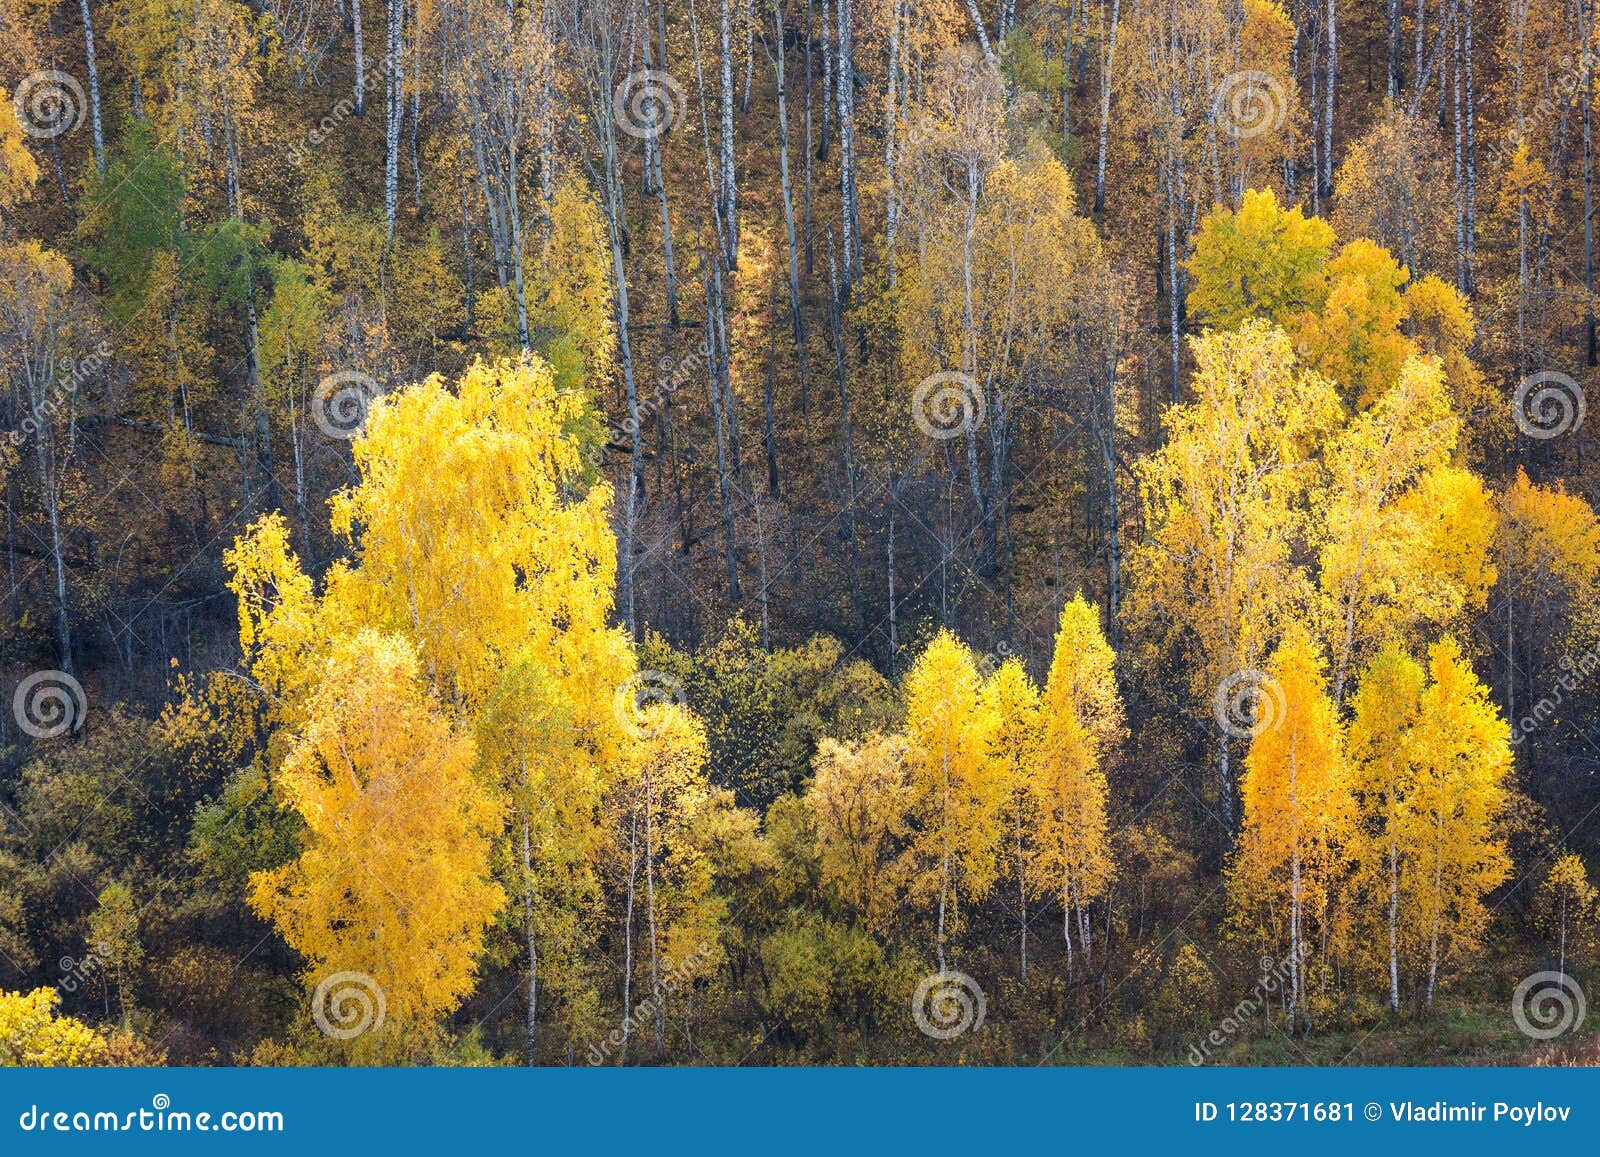 A Top View of Colourful Forest Trees in the Autumn Season. Krasnoyarsk